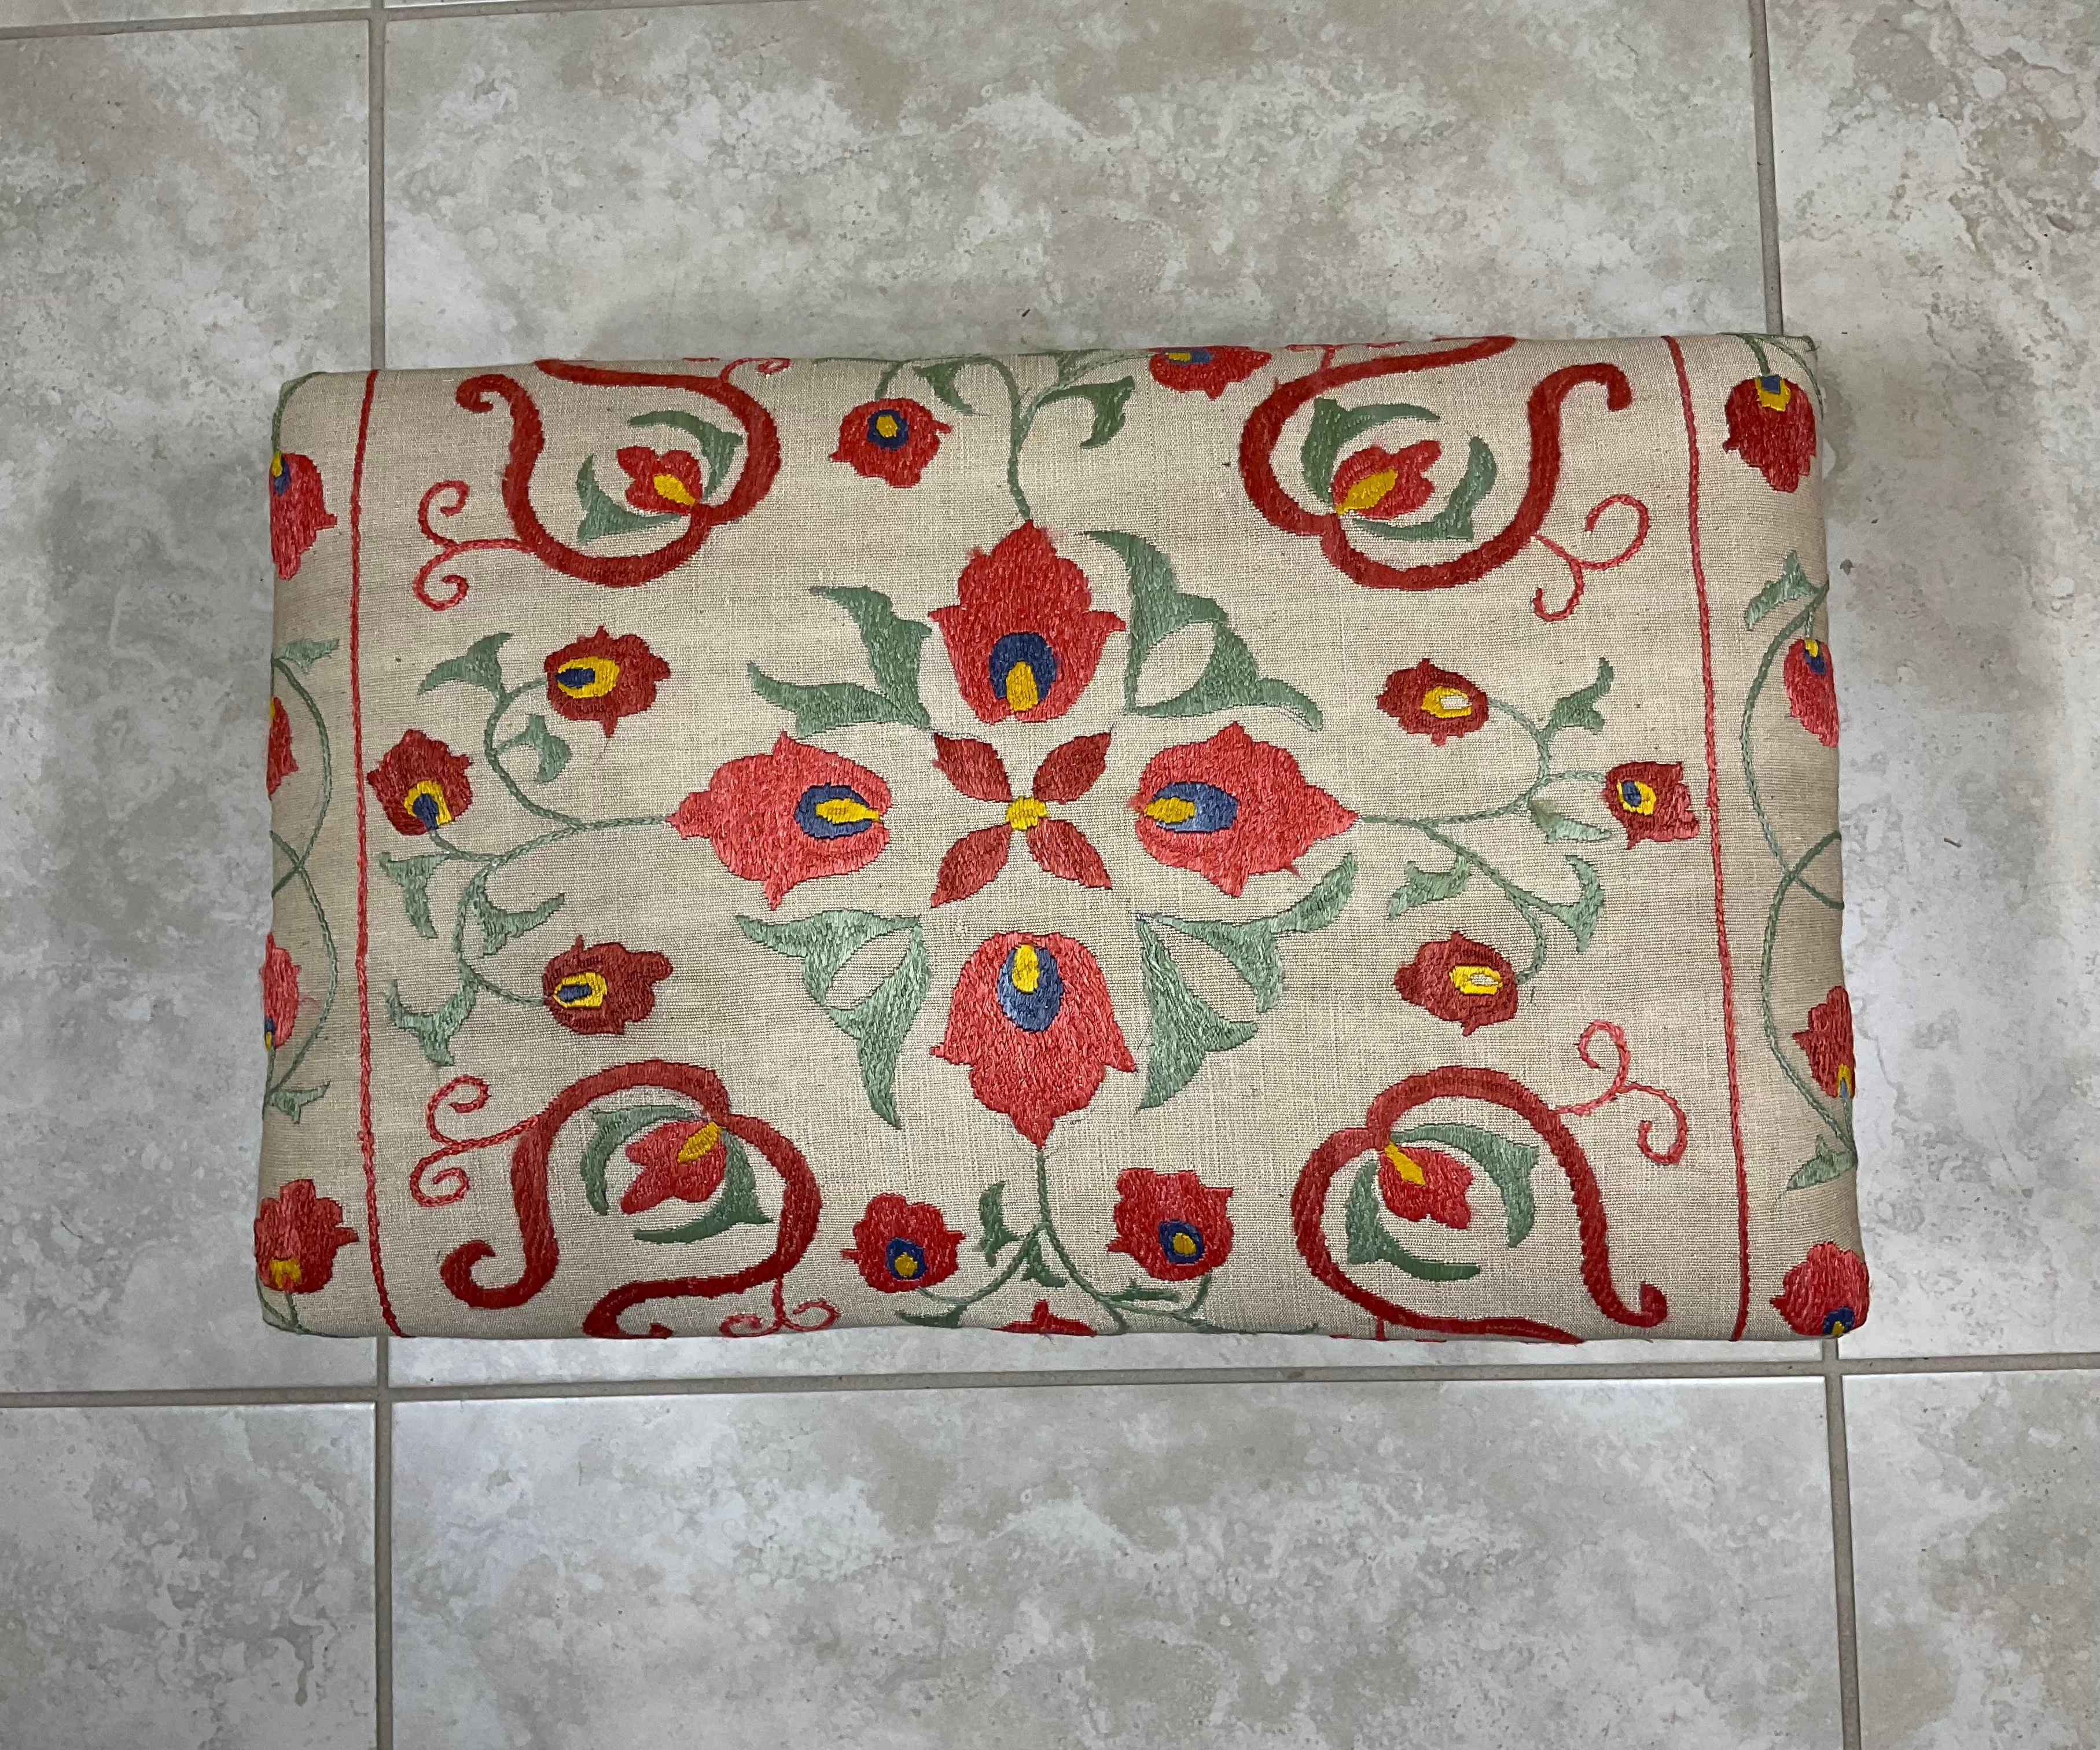 Mid-20th Century Vintage Hand Embroidery Suzani Textile Upholstered Foot Stool